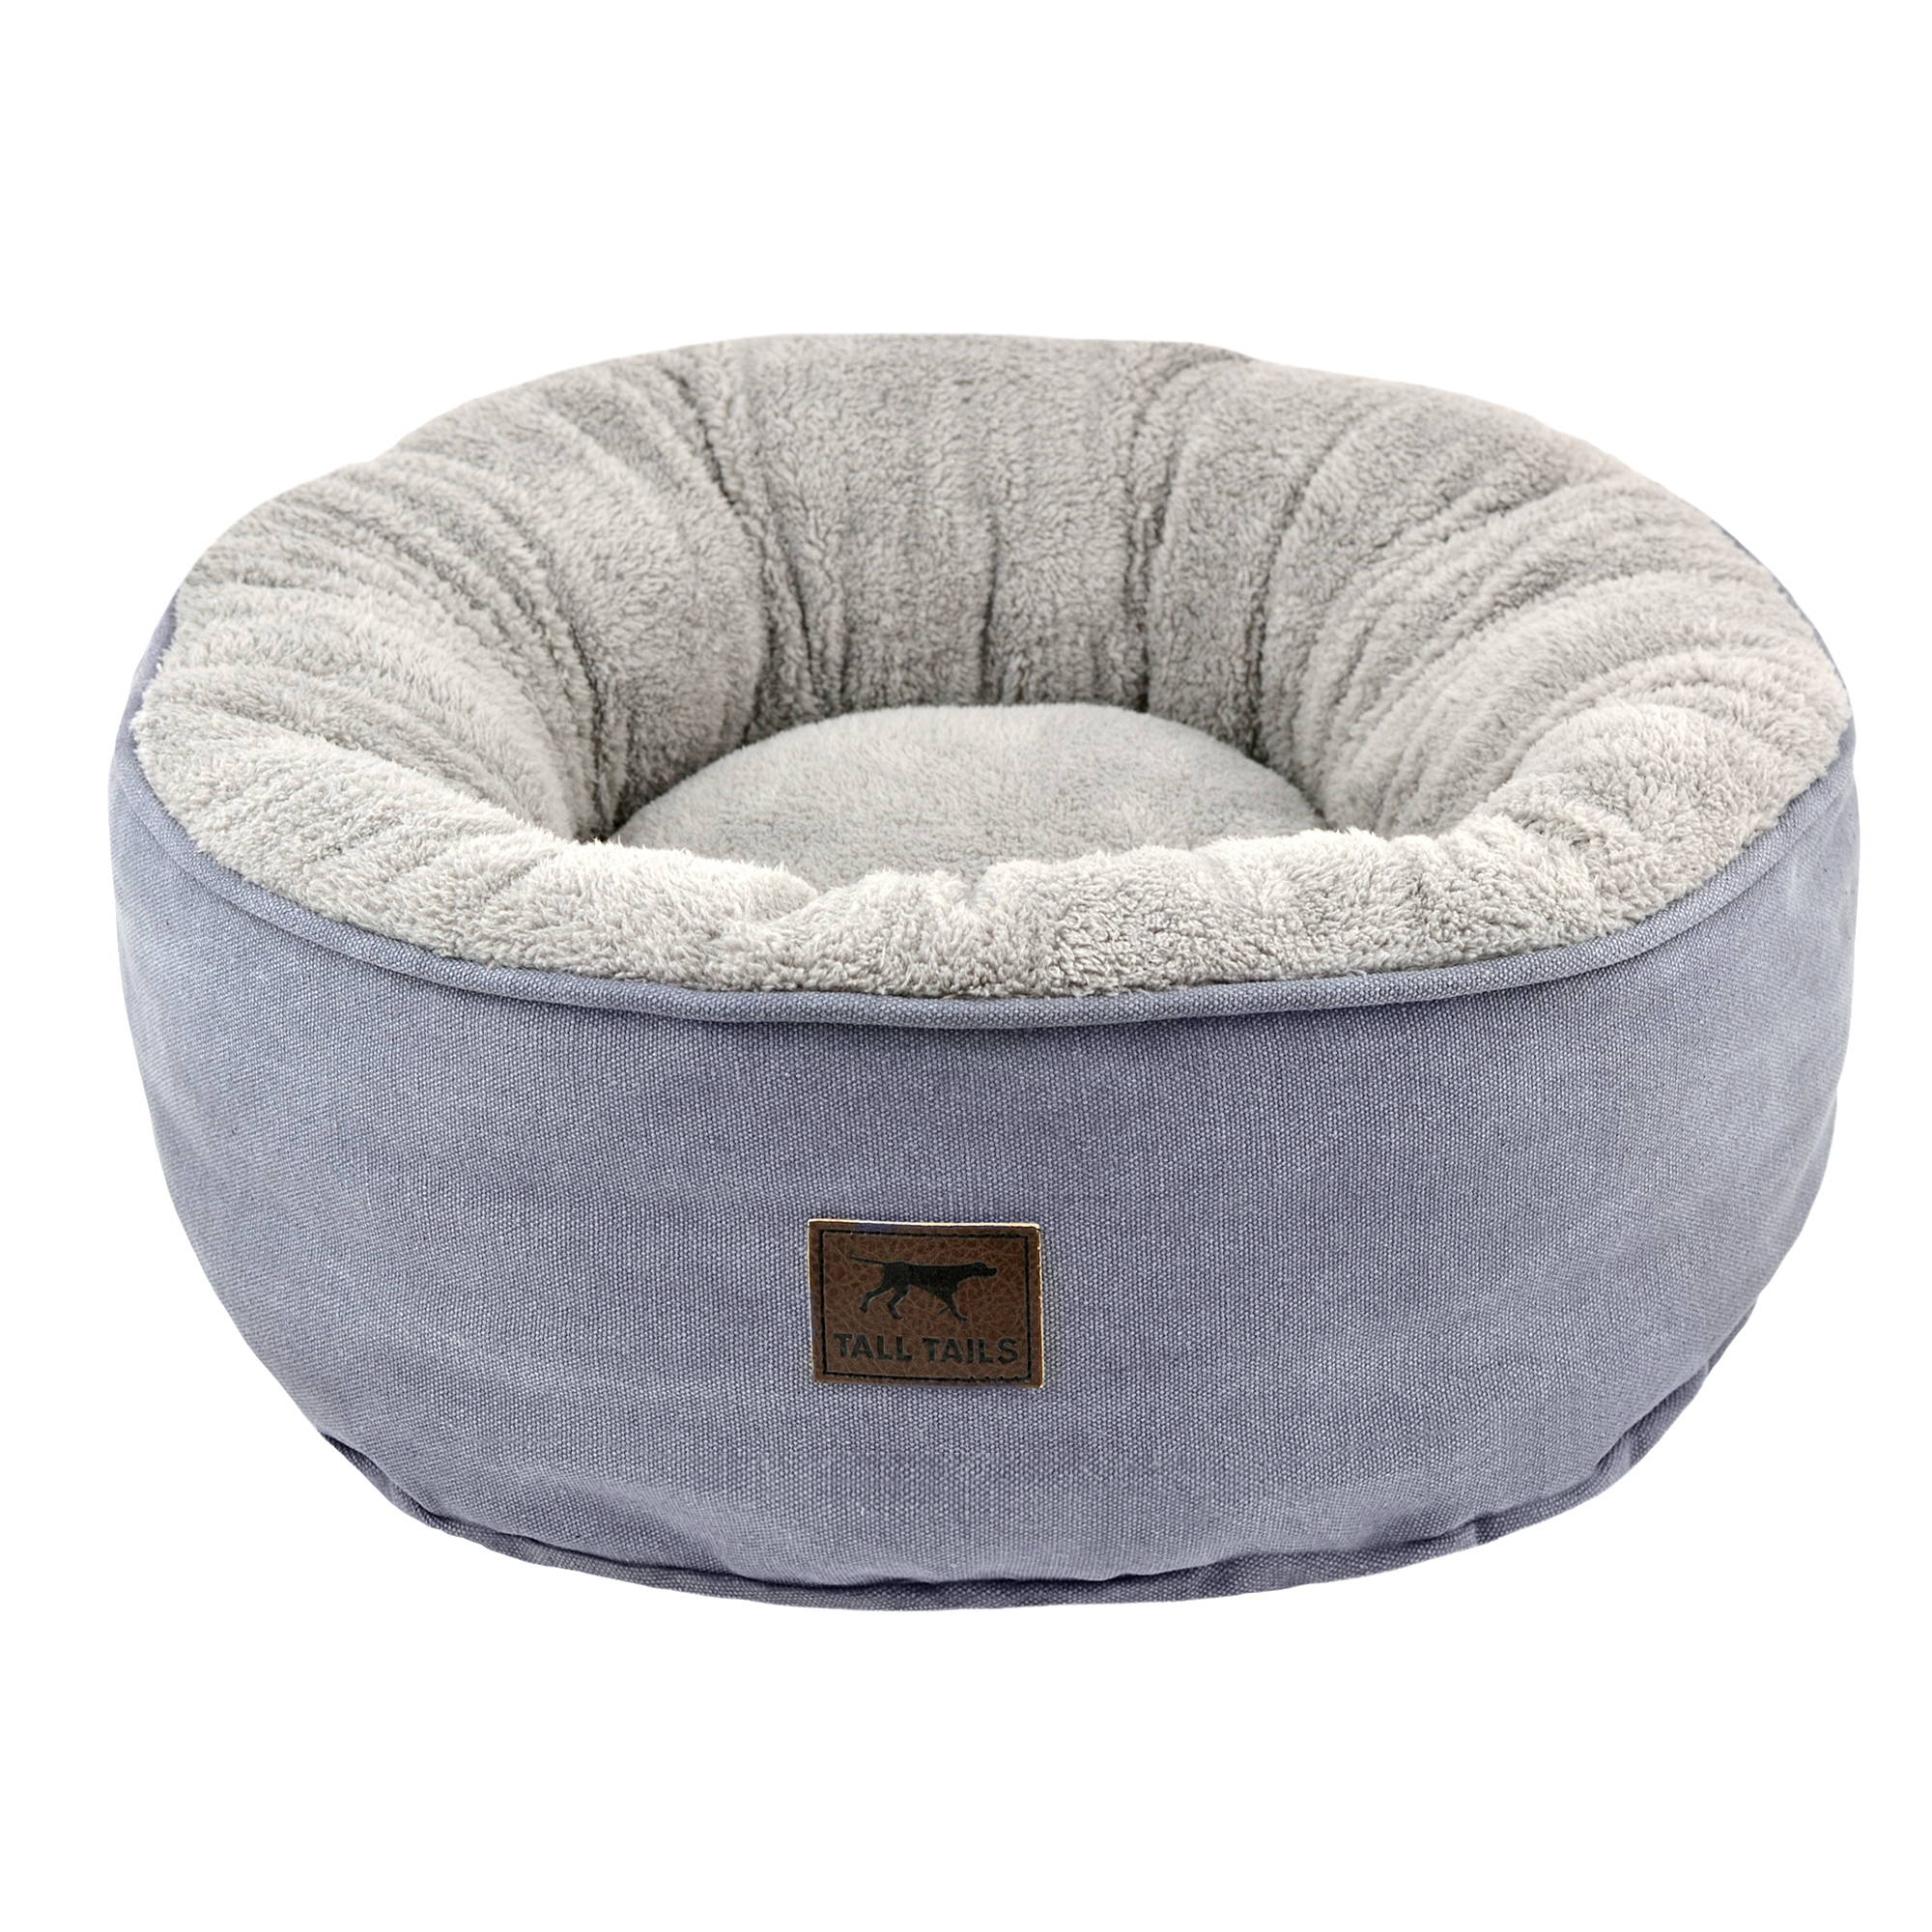 a grey and blue super plush Donut bed